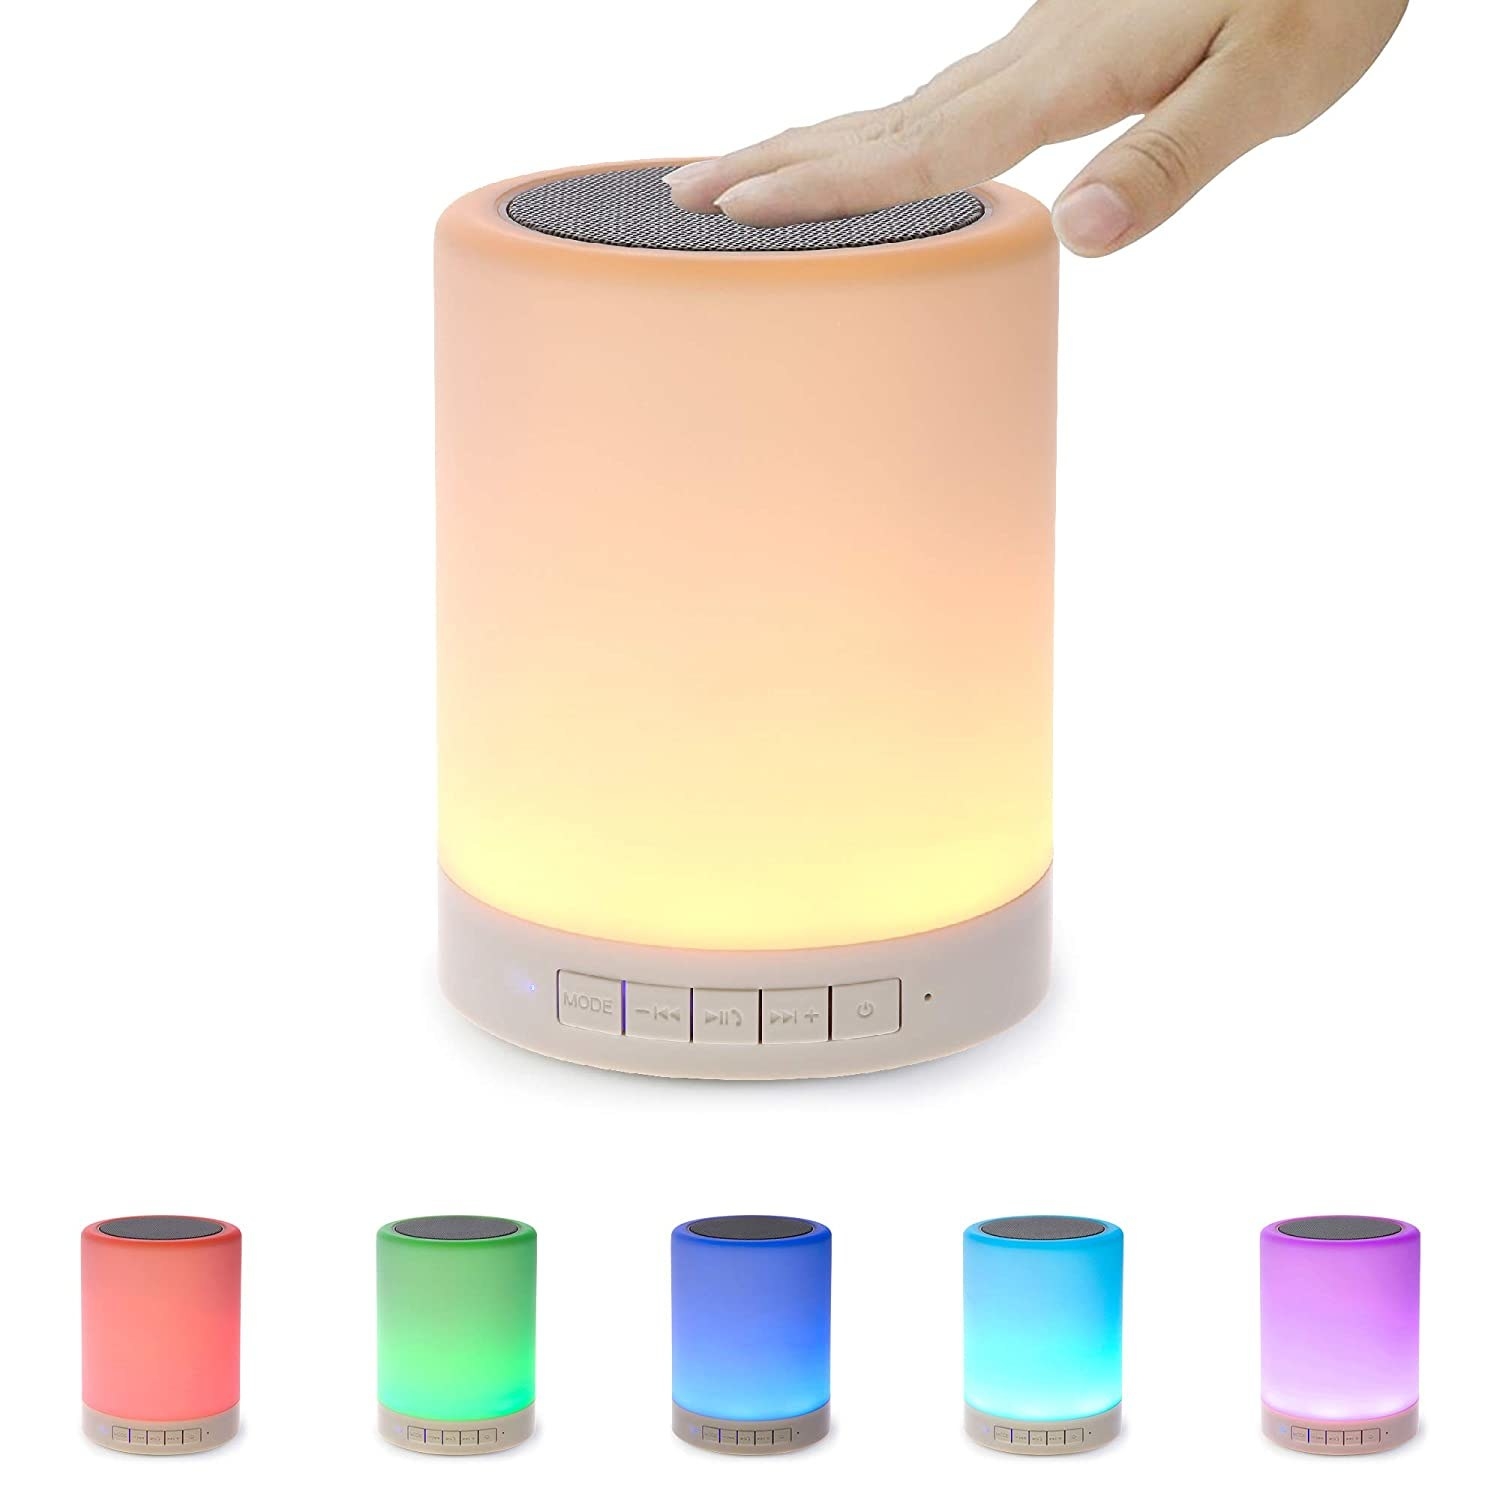 A bluetooth speaker and table lamp device being turned on, with different colour options displayed in a collage